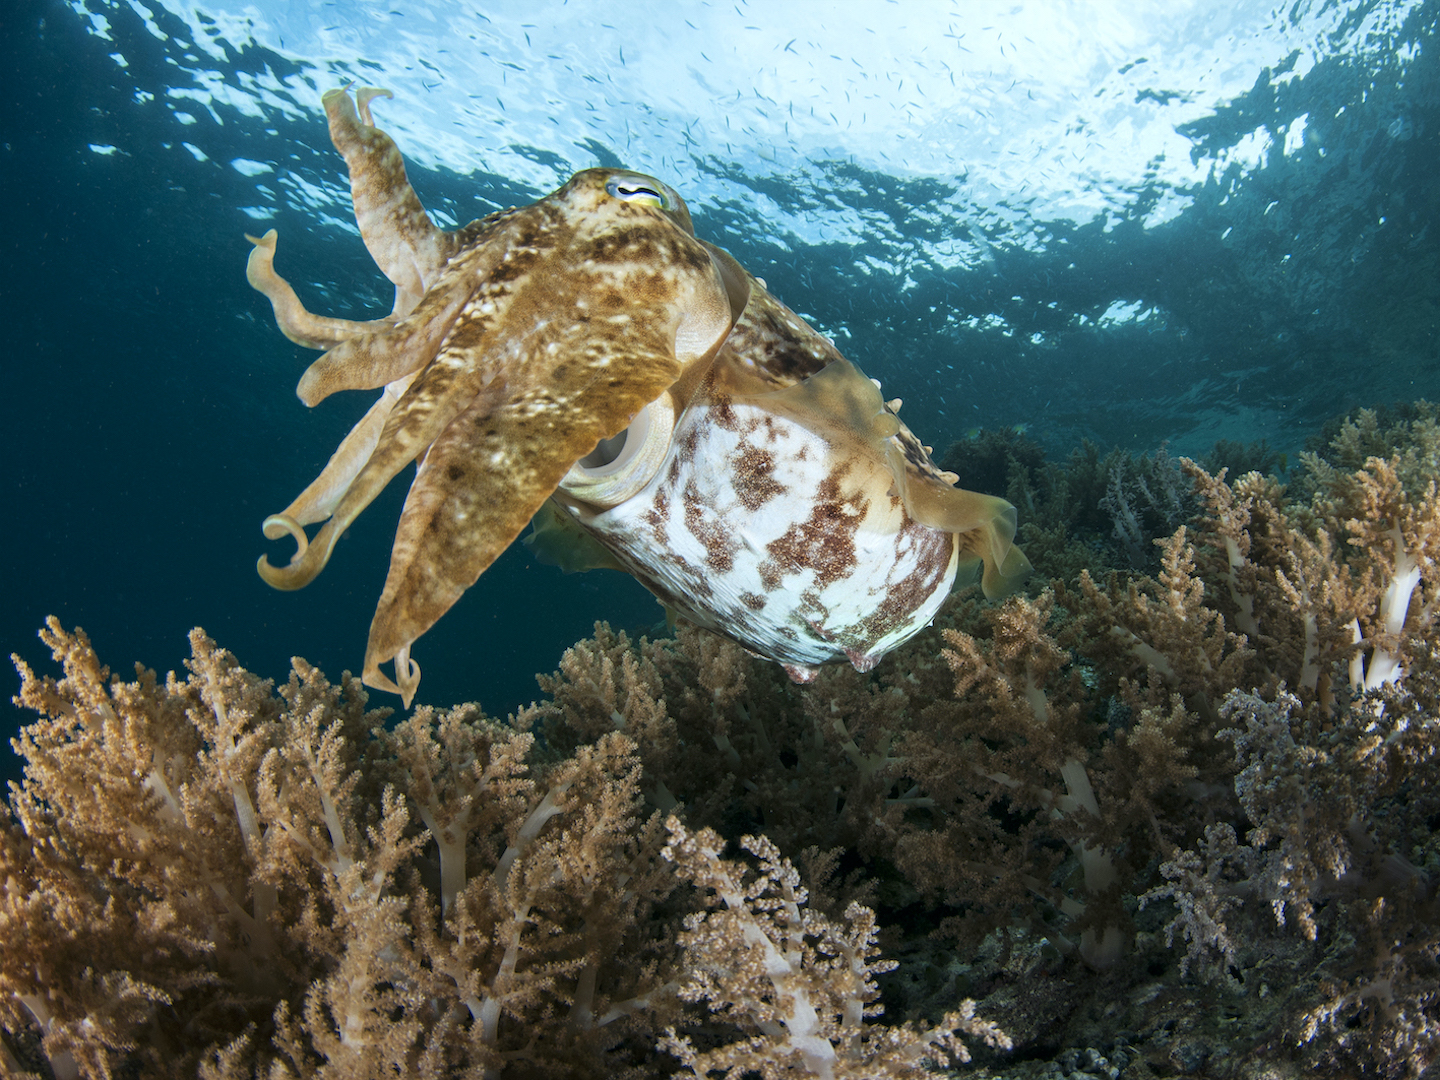 Squids are closely related to octopuses and cuttlefishes (pictured here) (cephalopods), with whom they share traits like heightened cognition and an incredible ability to camouflage. Unlike many species of these predatory cousins that inhabit reefs, squids are more adapted to a life swimming in the blue.